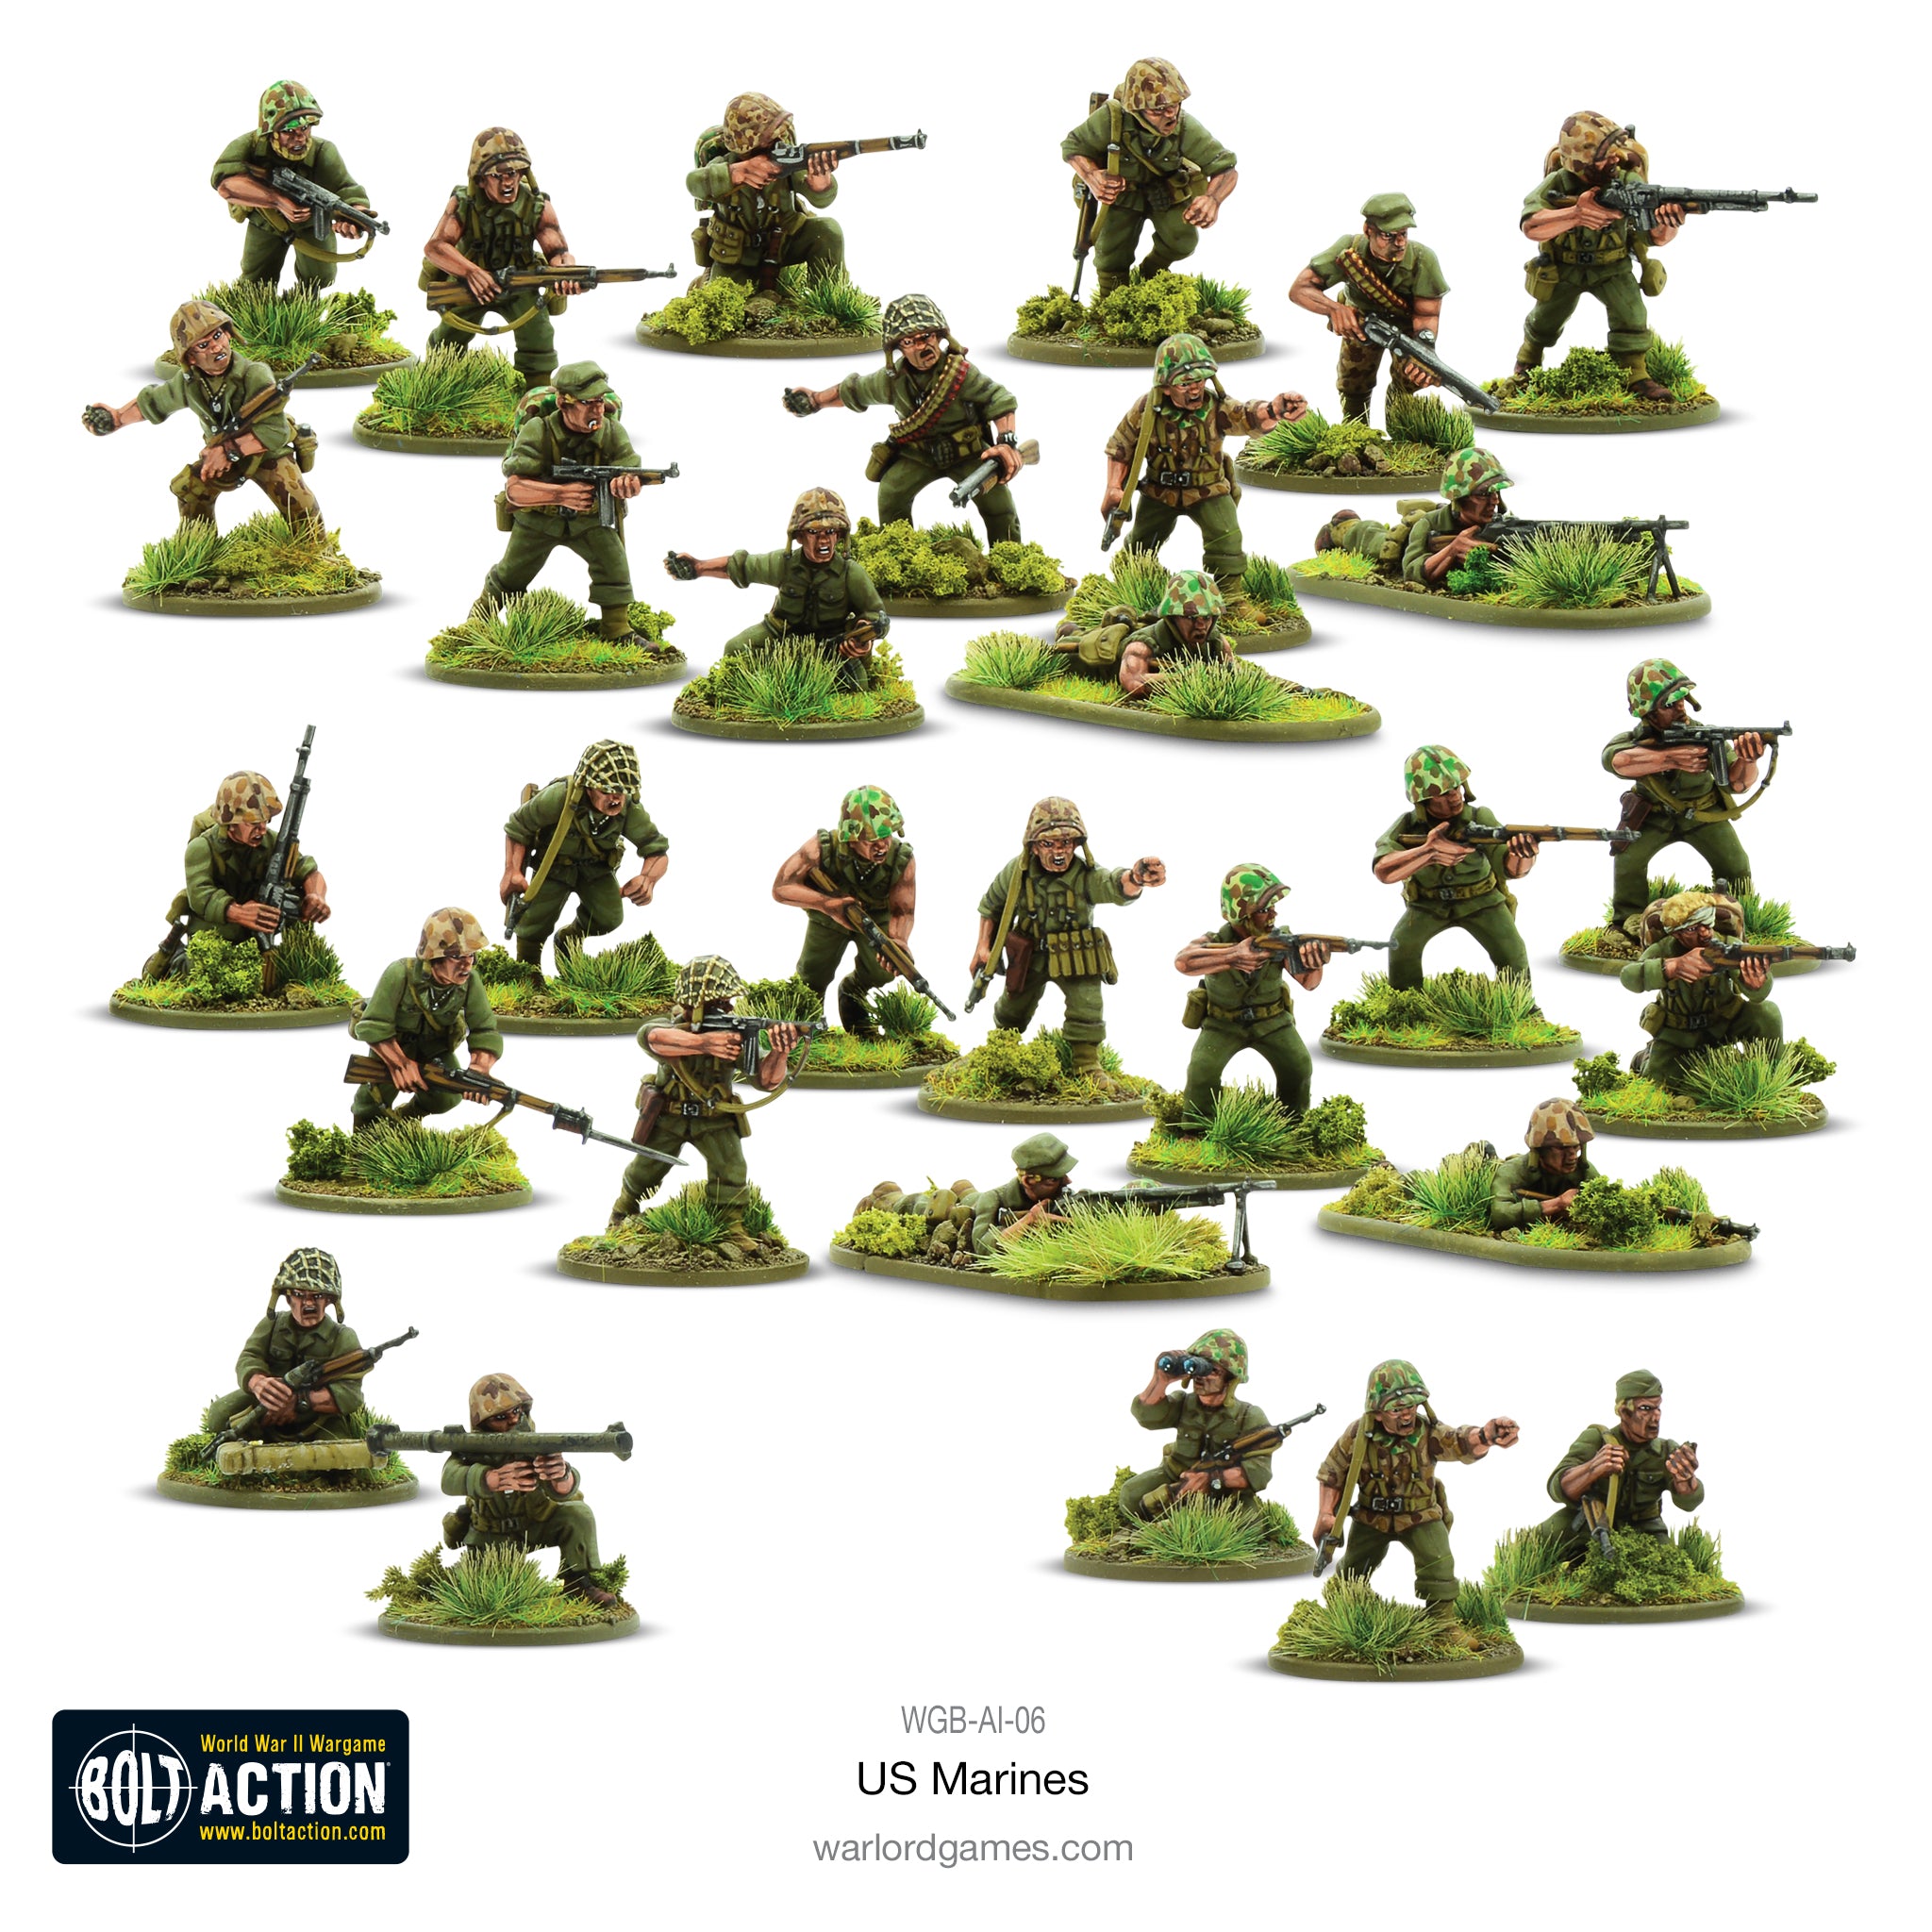 Warlord Large Paint Rack – Warlord Games US & ROW